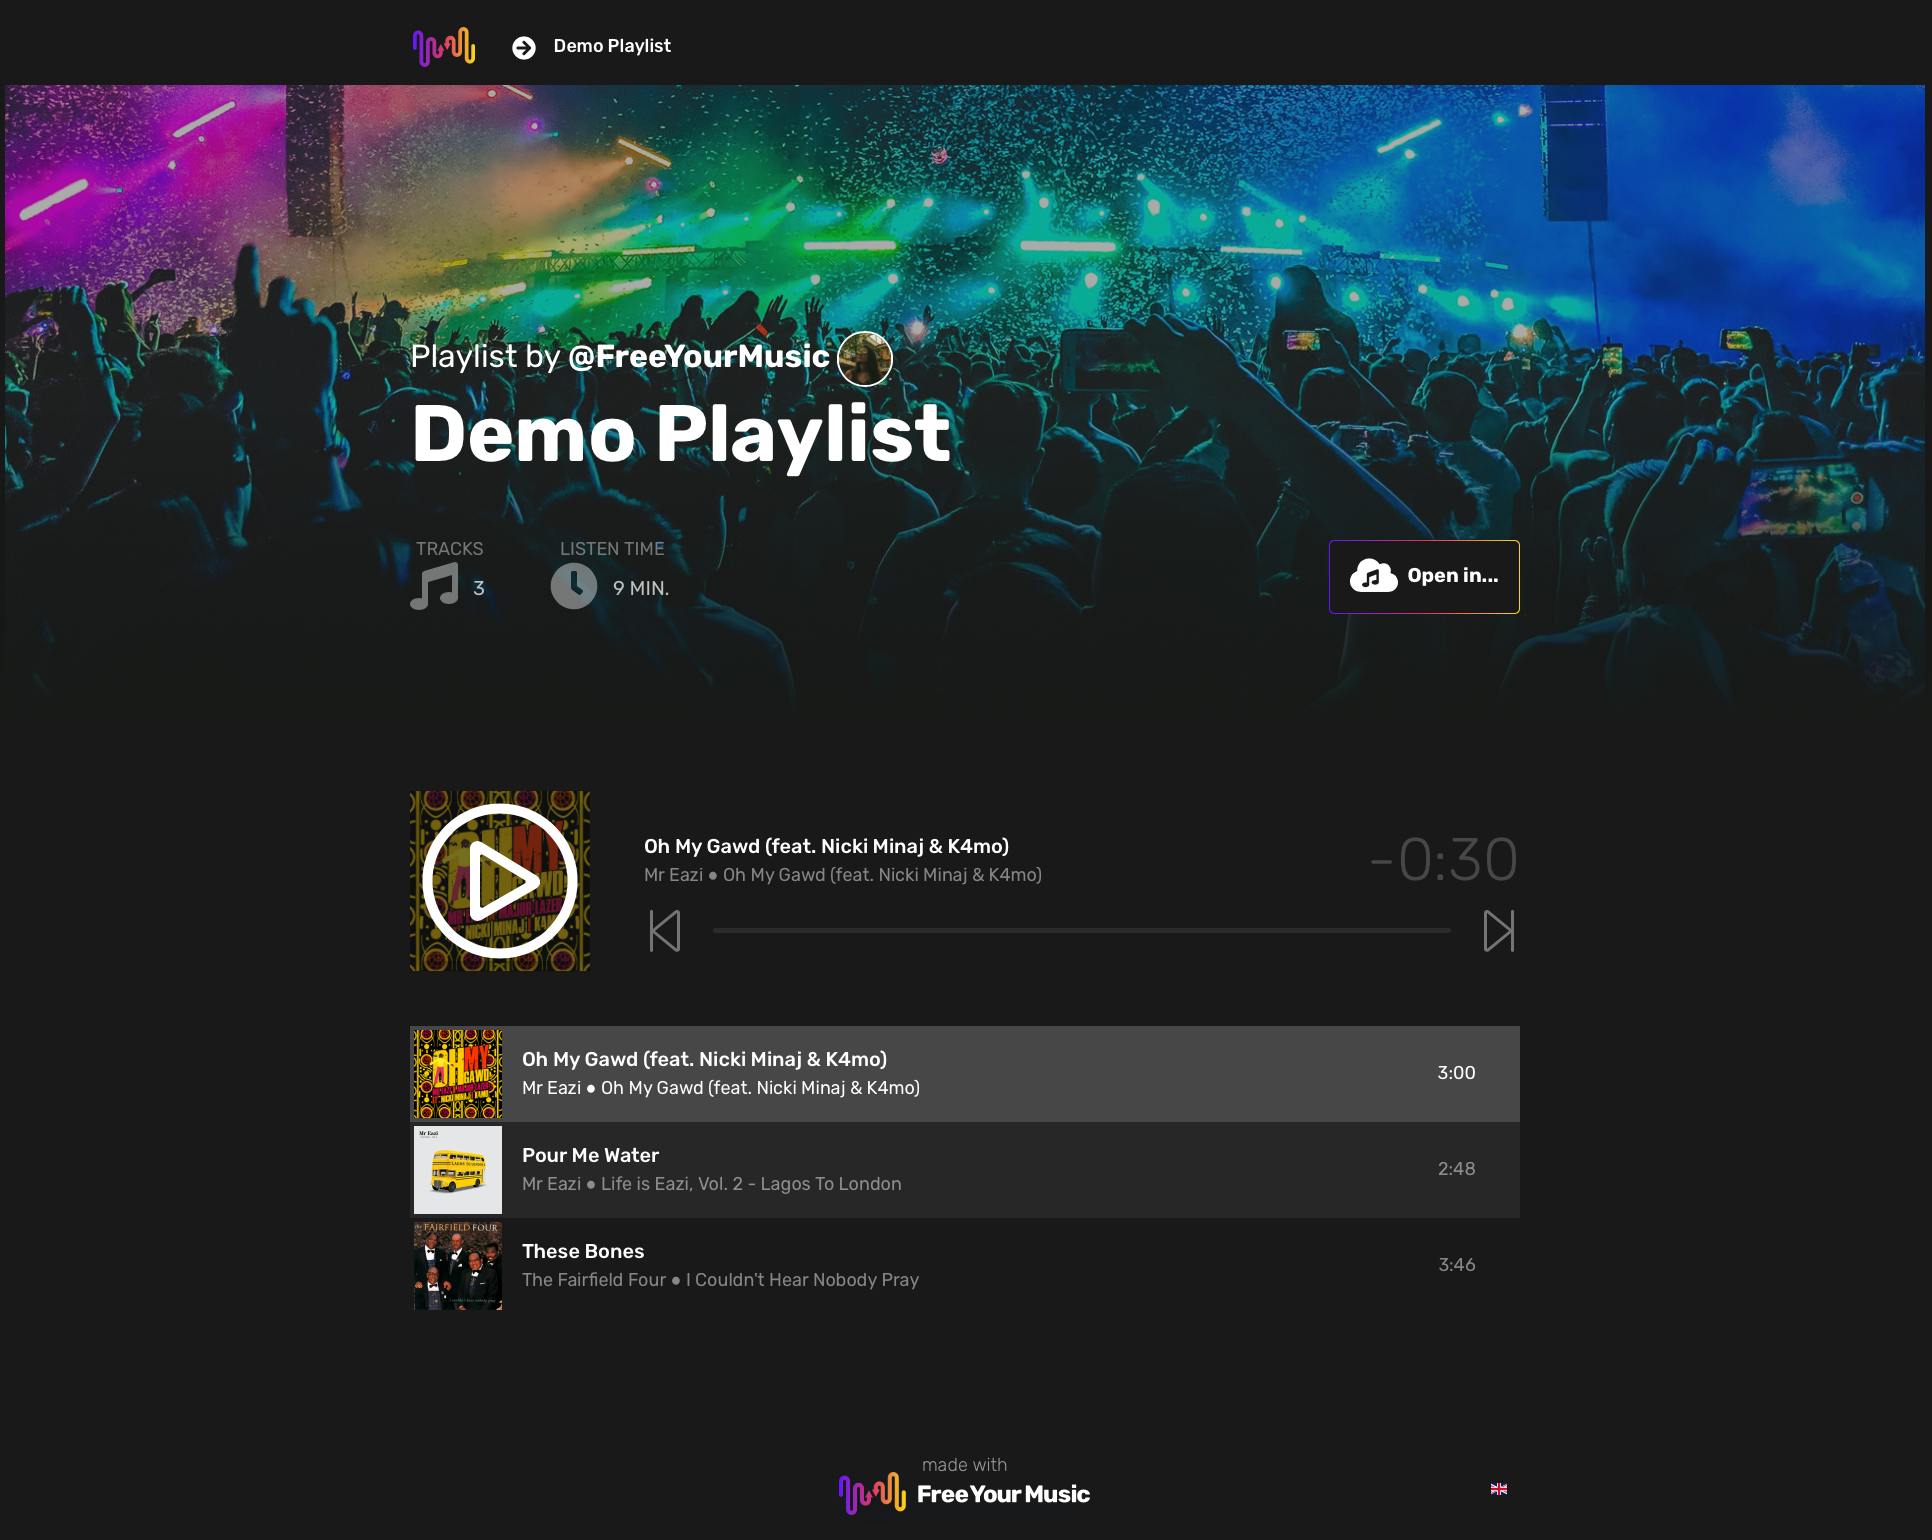 Promote your music on all streaming platforms with a single smart link. Direct fans to a sleek landing page that allows them to open your playlists in their favorite music streaming app.